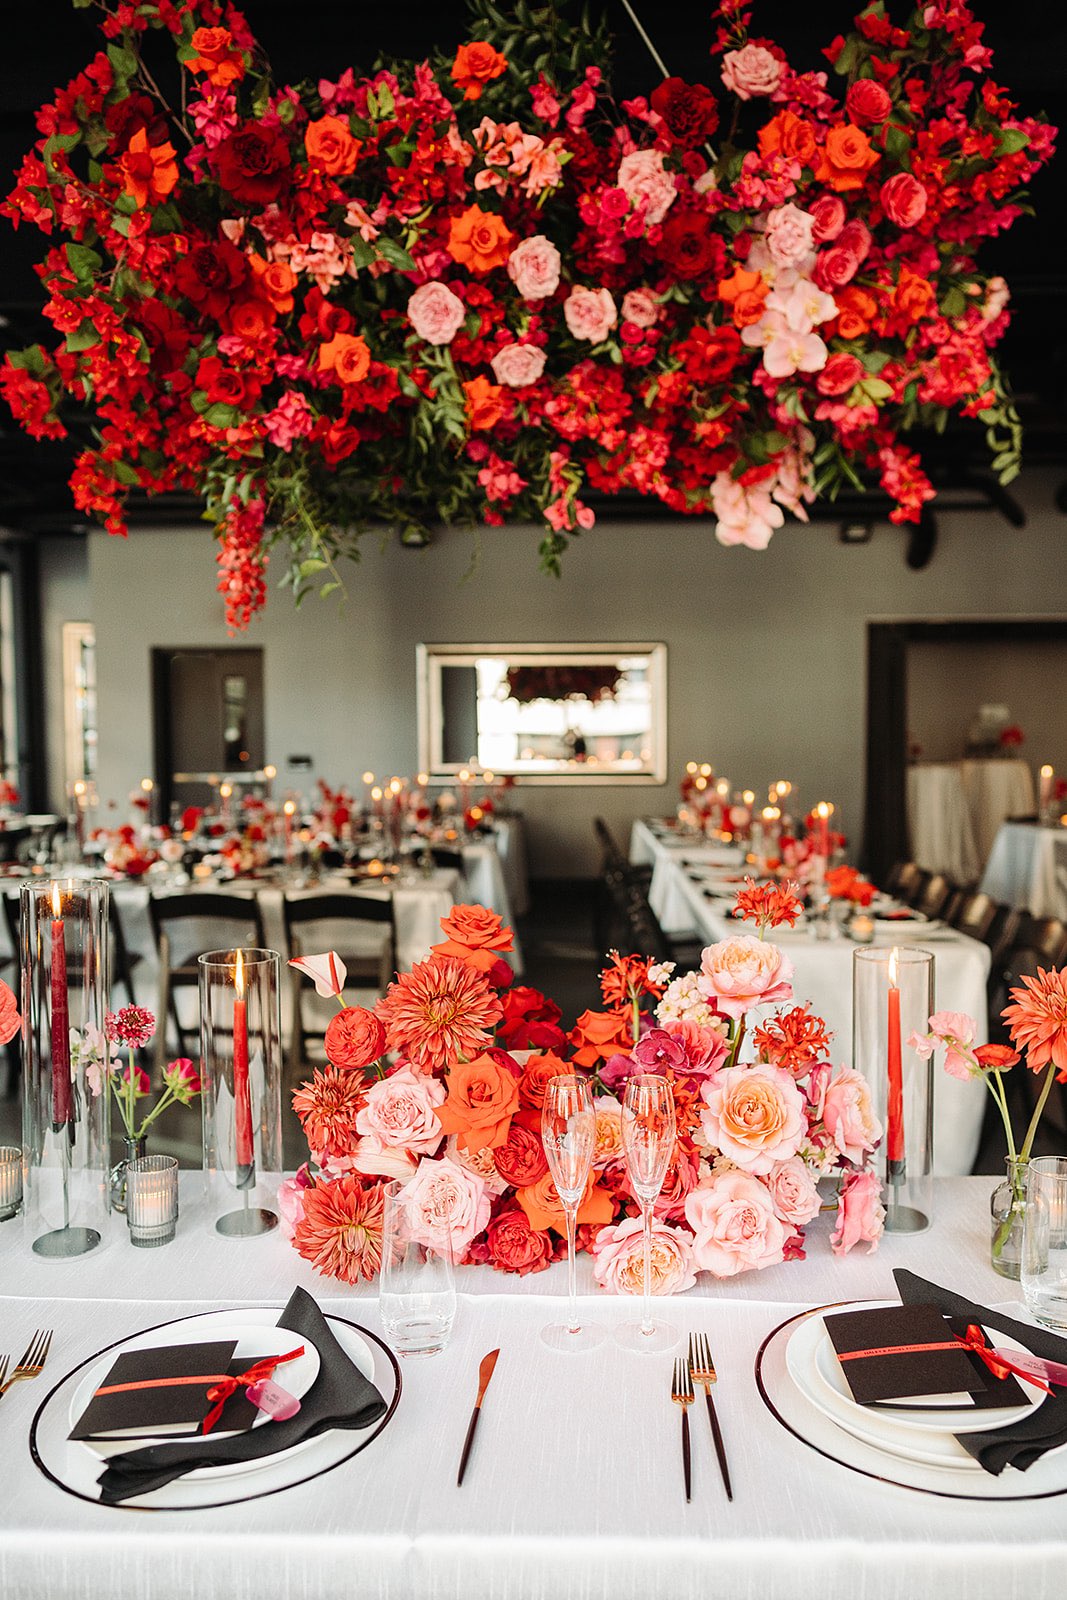 Bright red and pink flowers on sweetheart table with hanging flowers above